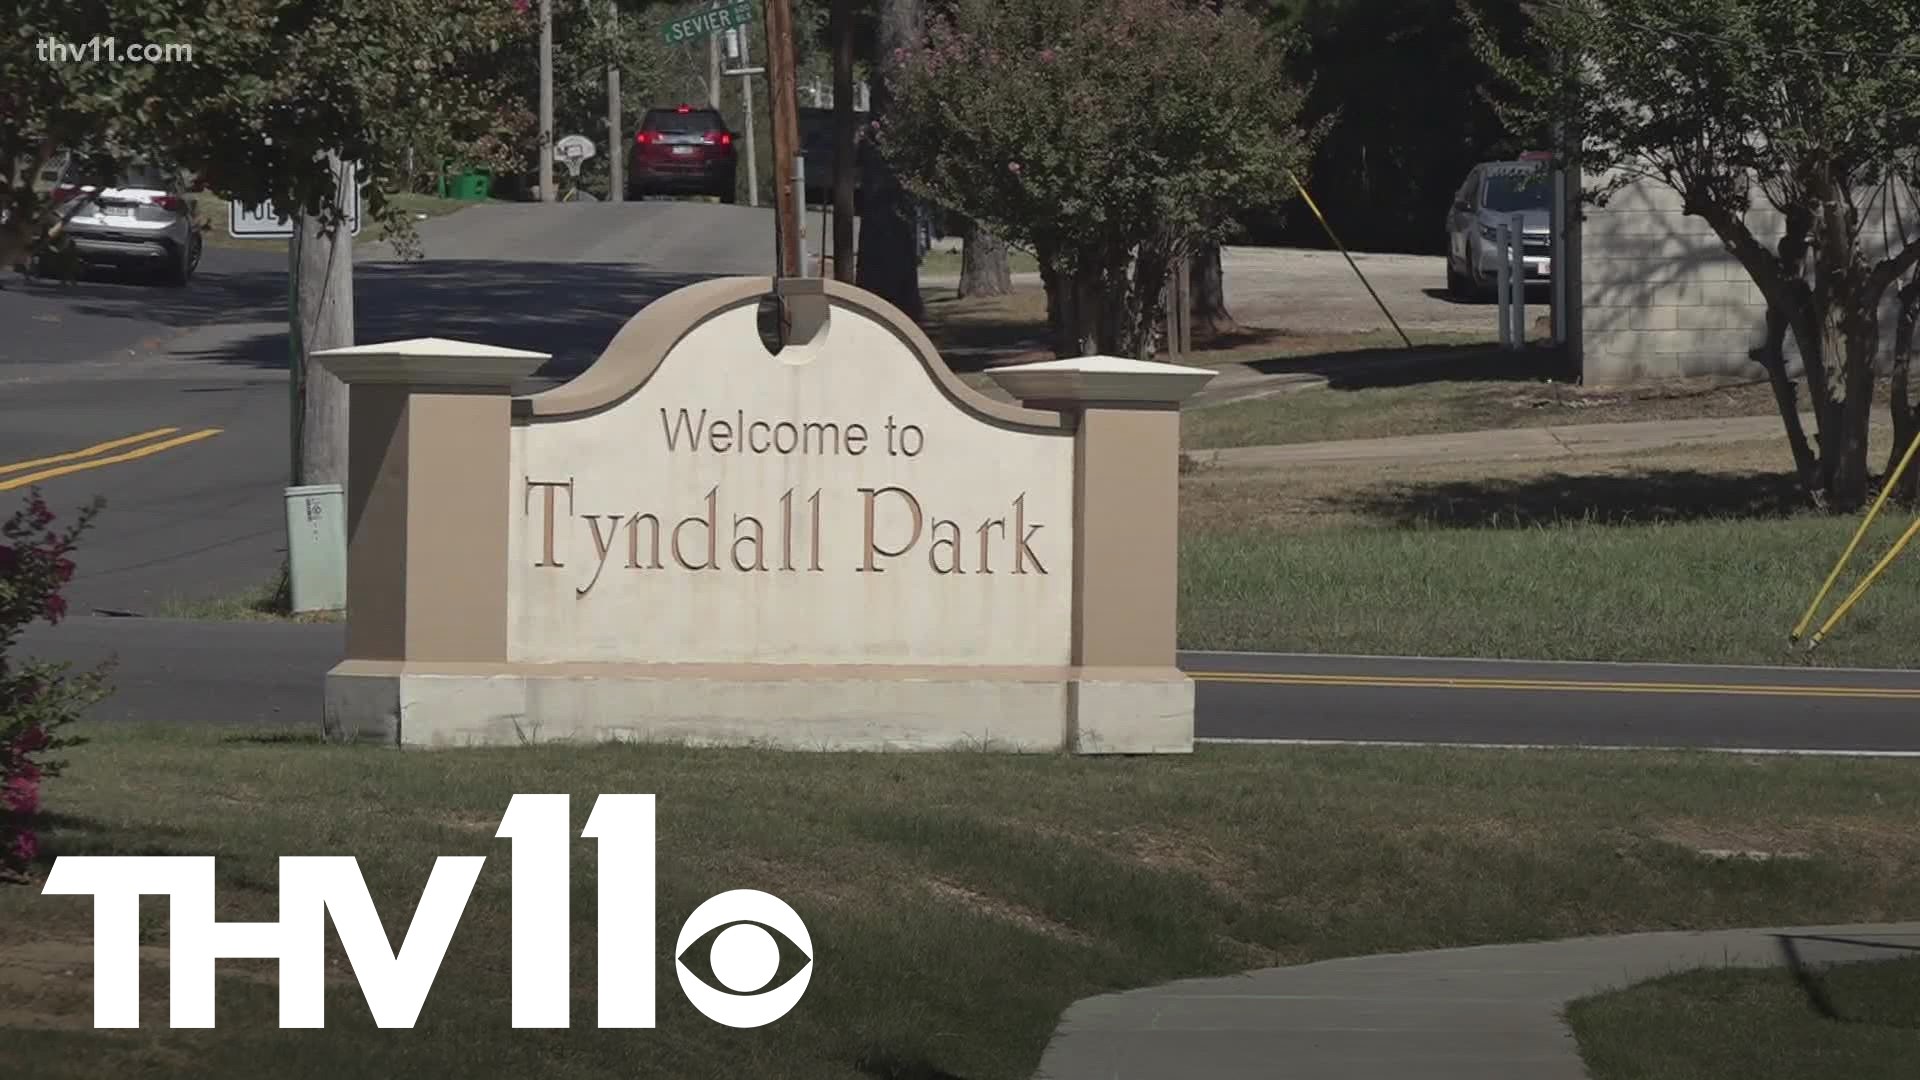 The Benton Police Department responded to a shots fired call at Tyndall park on Tuesday, and now the community is reacting to the incident.